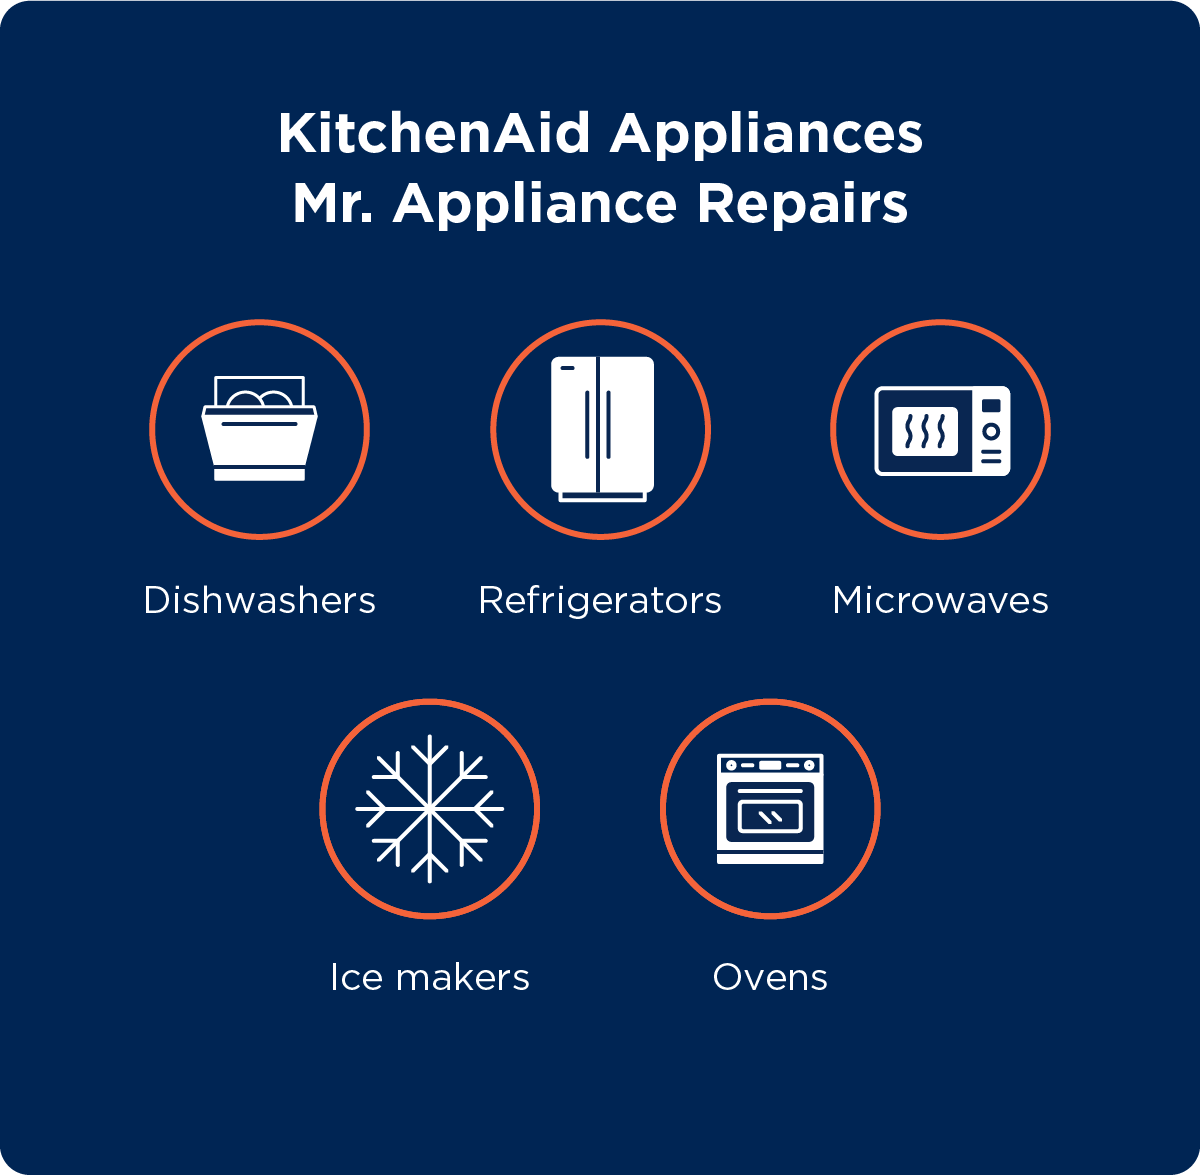 Graphic showing which KitchenAid appliances Mr. Appliance repairs.